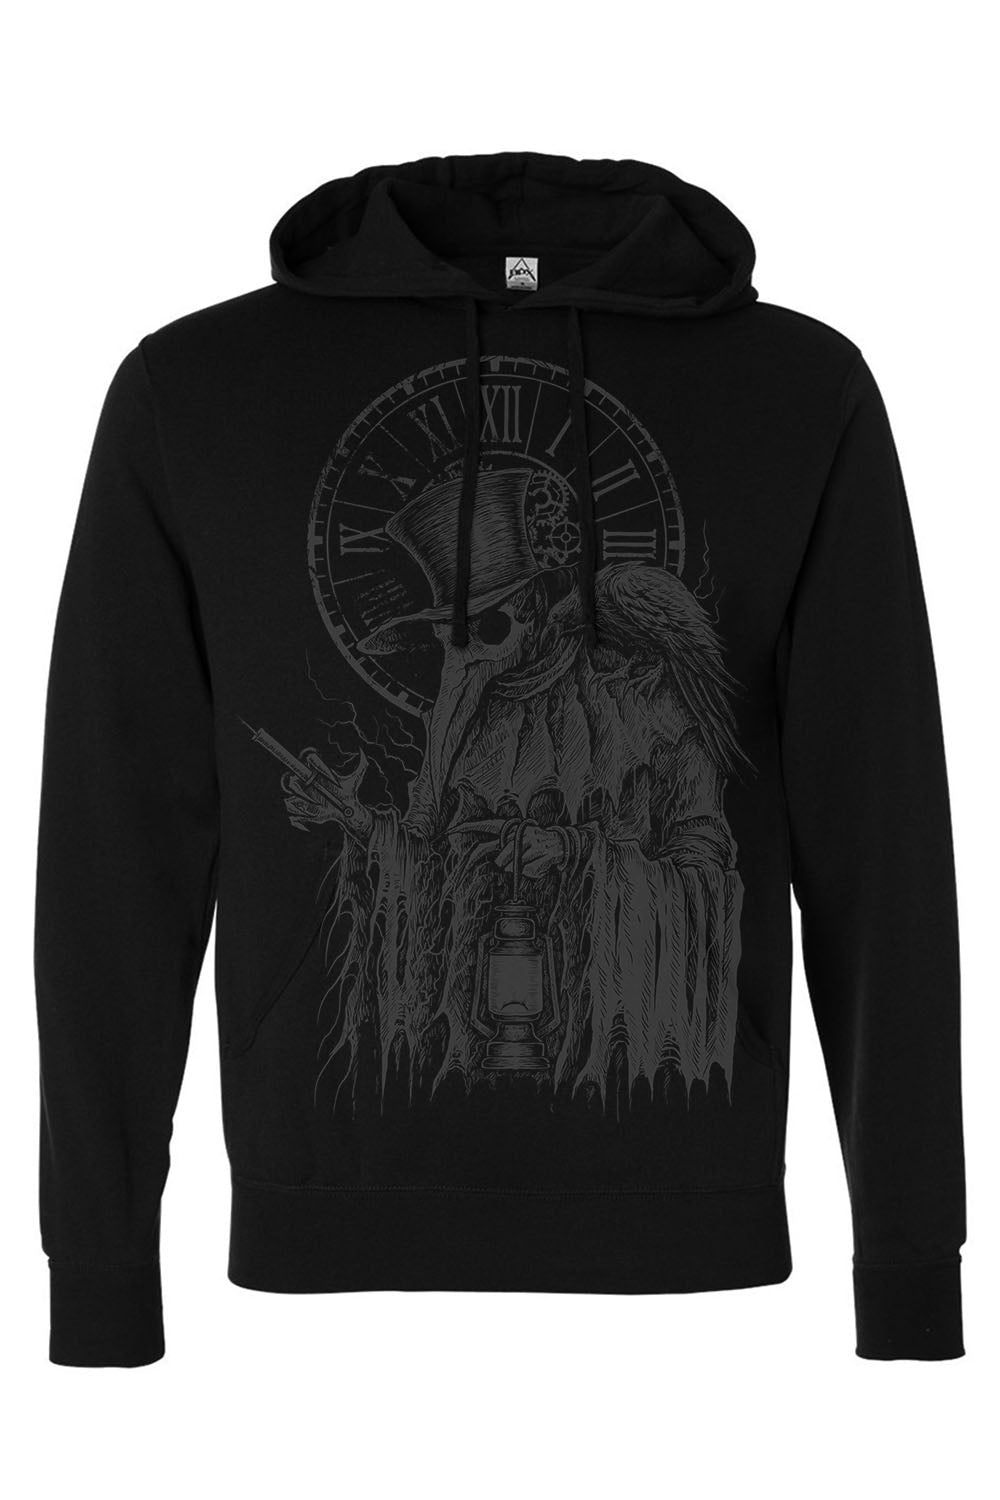 Plague Doctor Hoodie [GREY ASHES] [Zipper or Pullover]